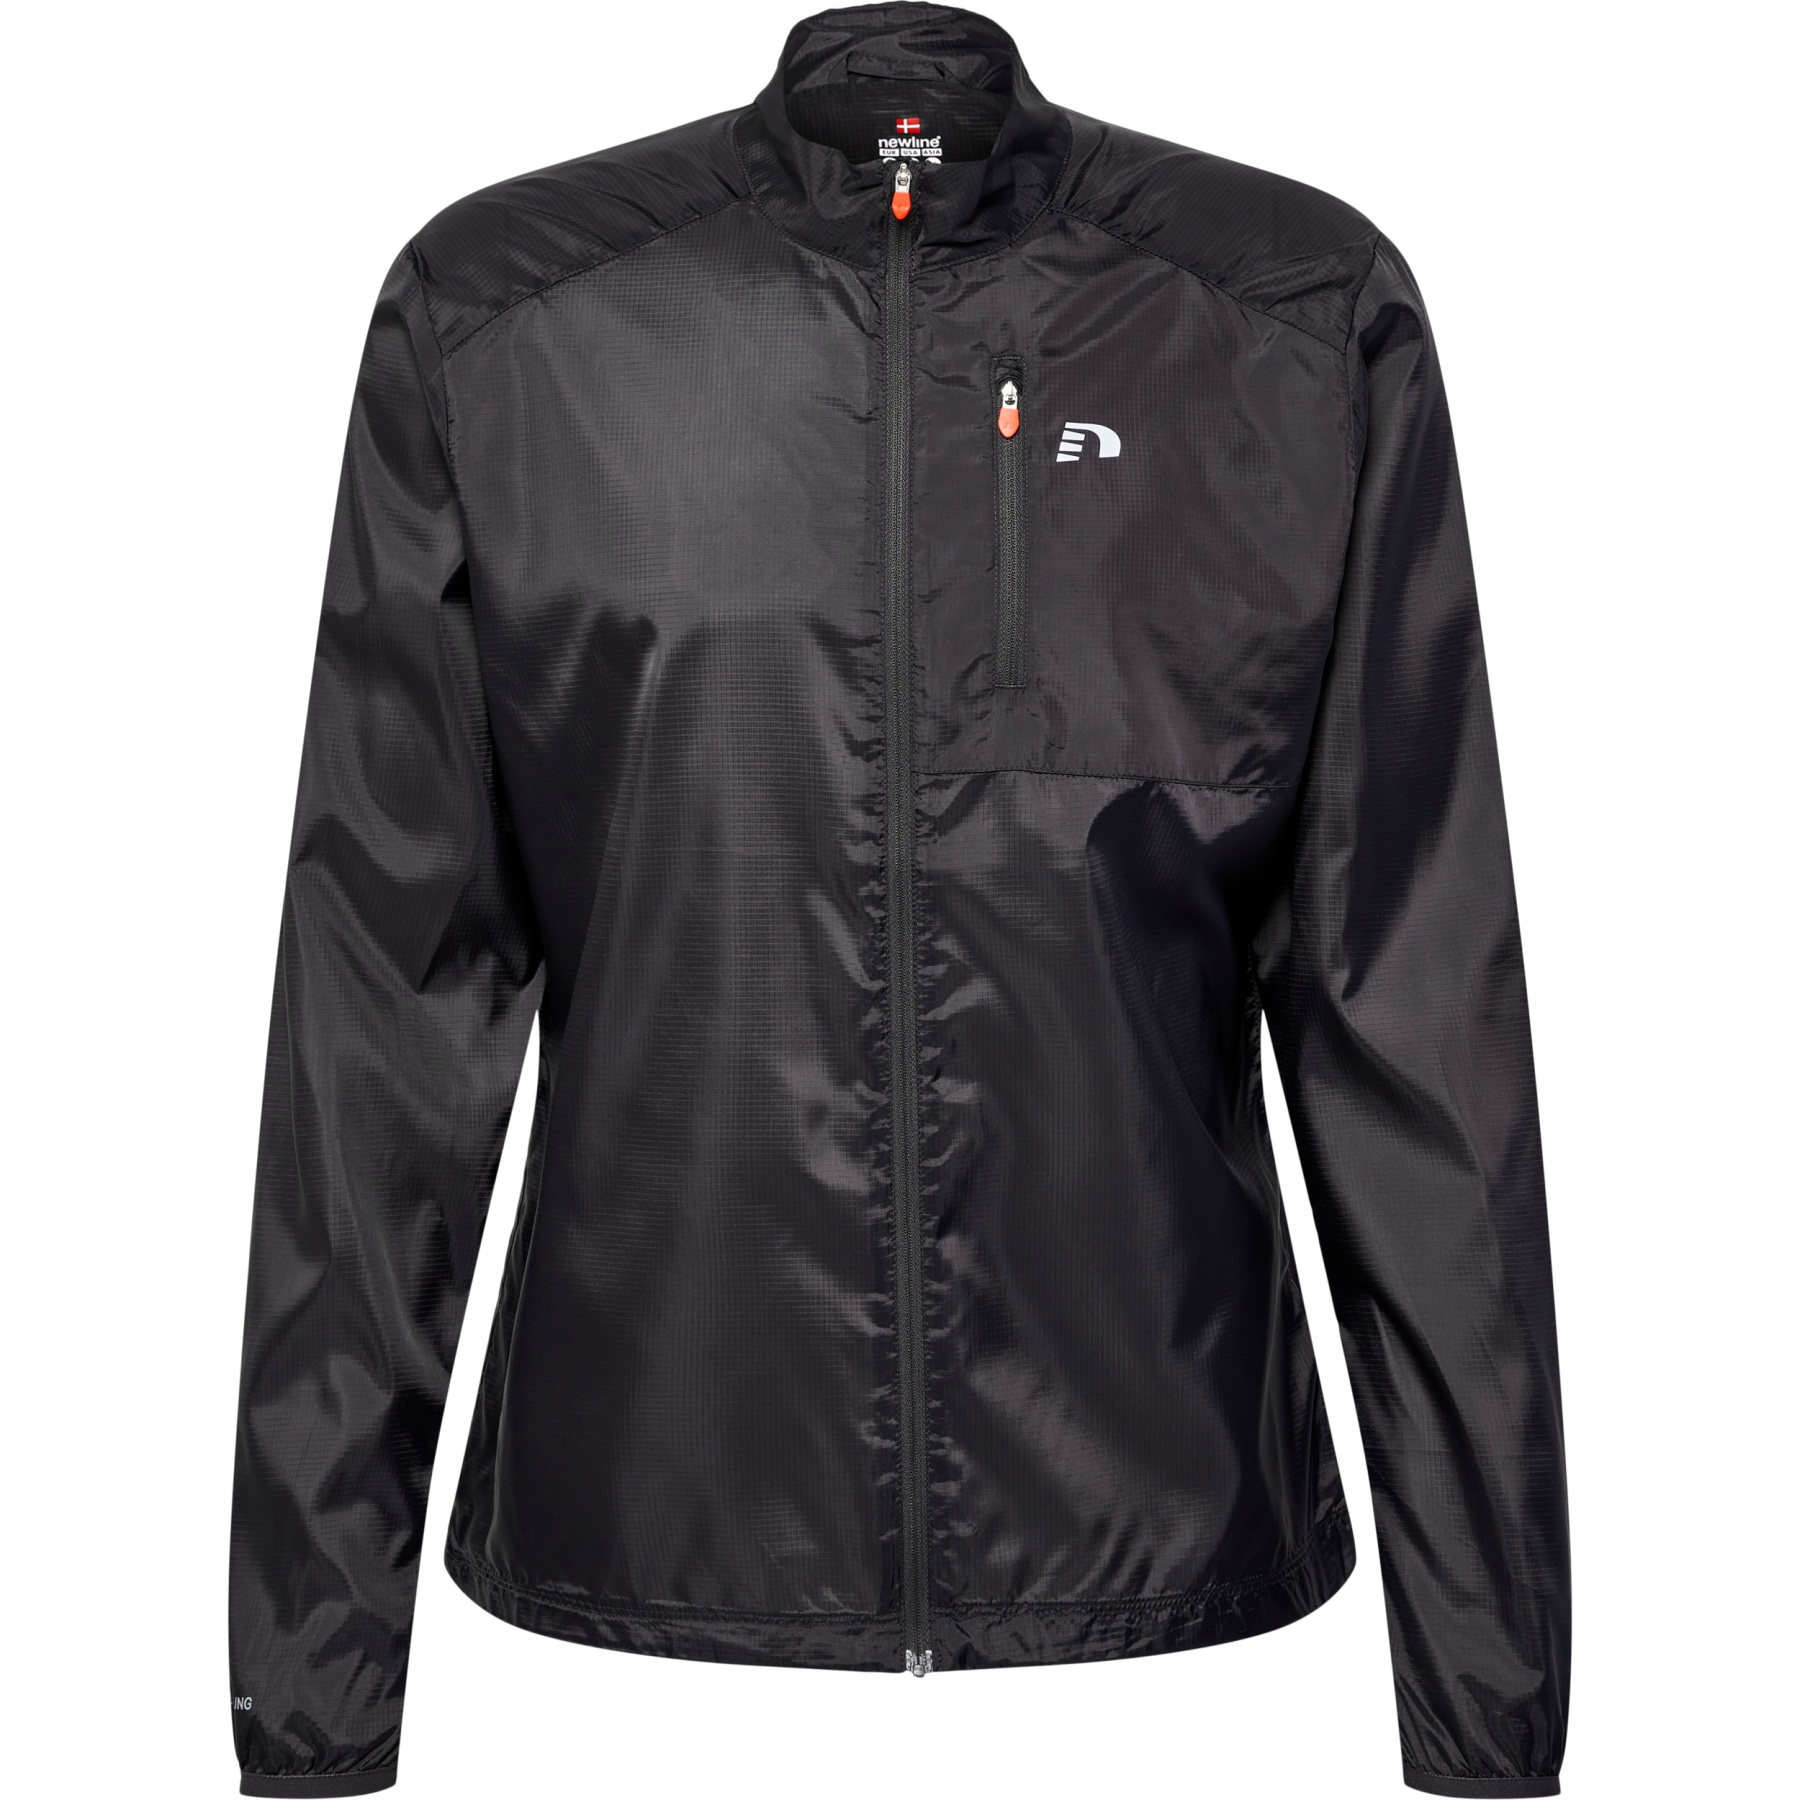 Productfoto van Newline Packable Tech Jacket - forged iron